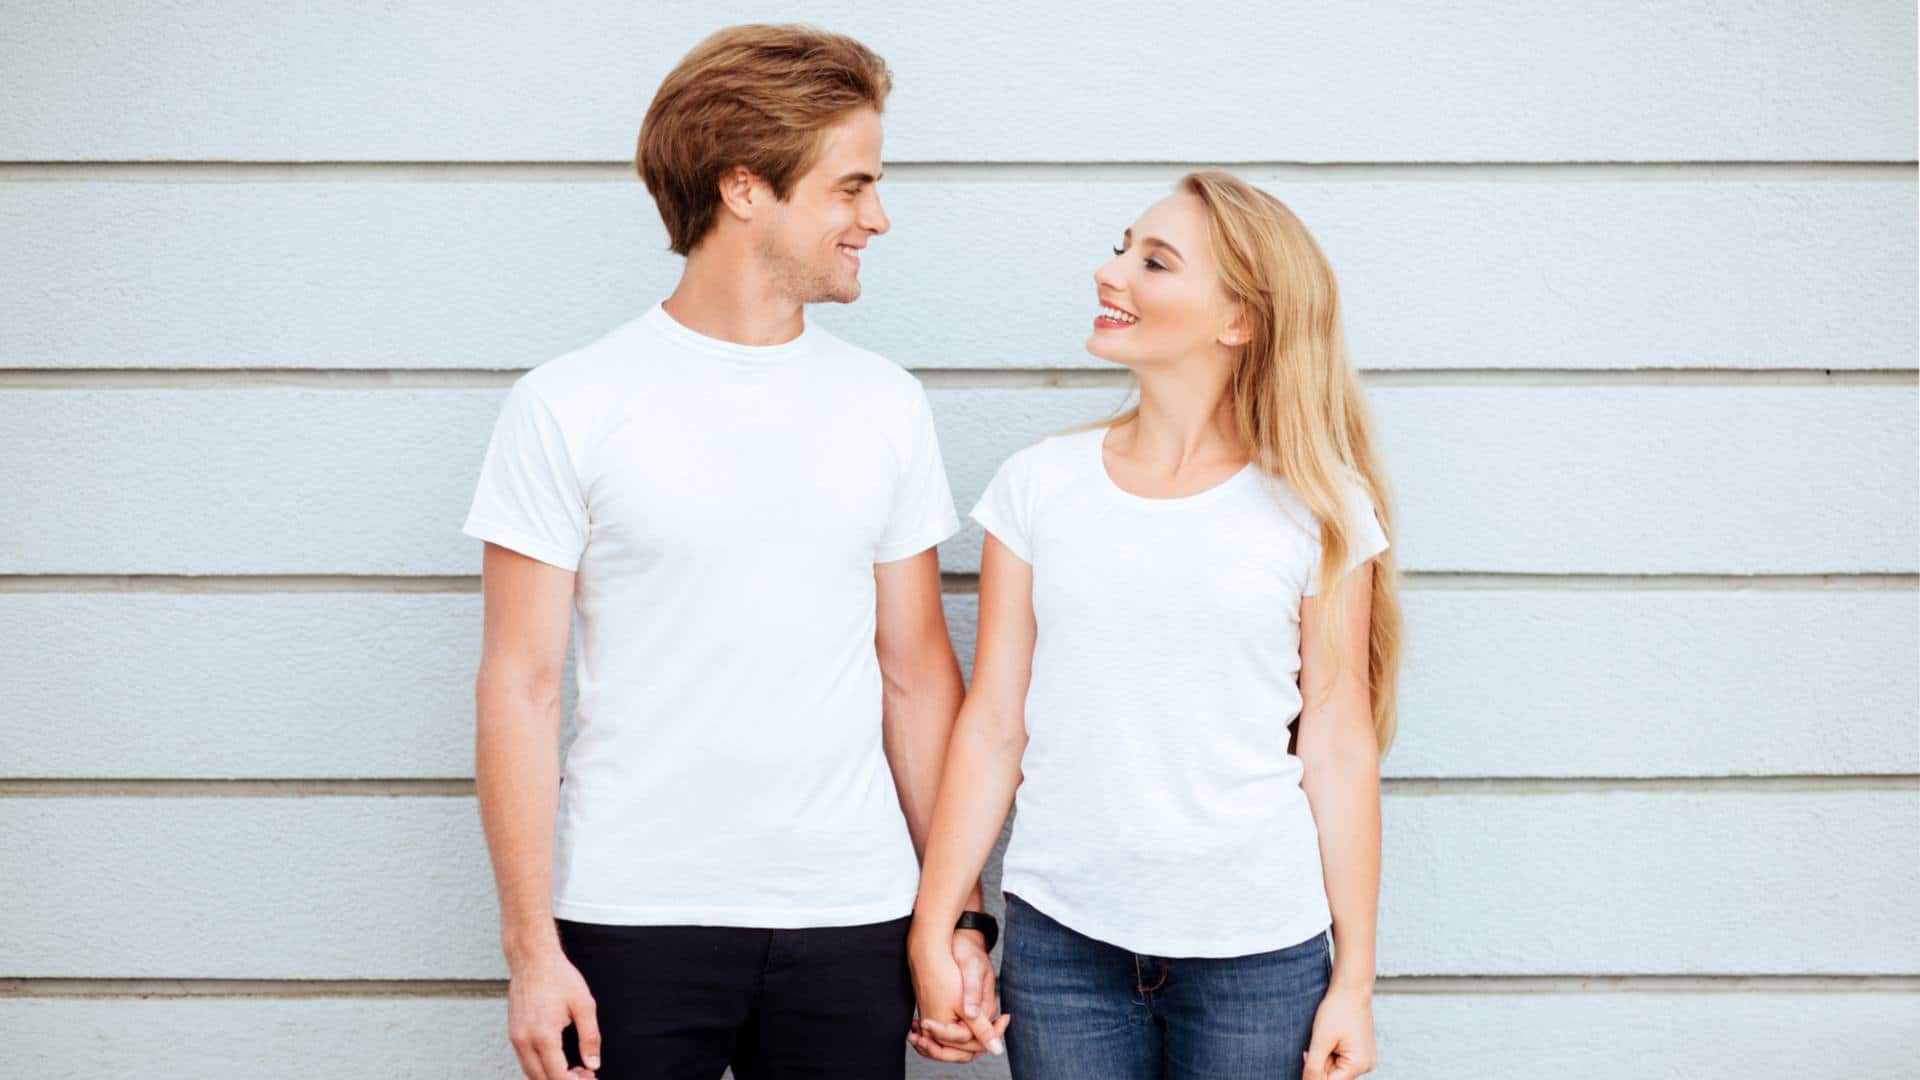 differences between male and female t-shirts